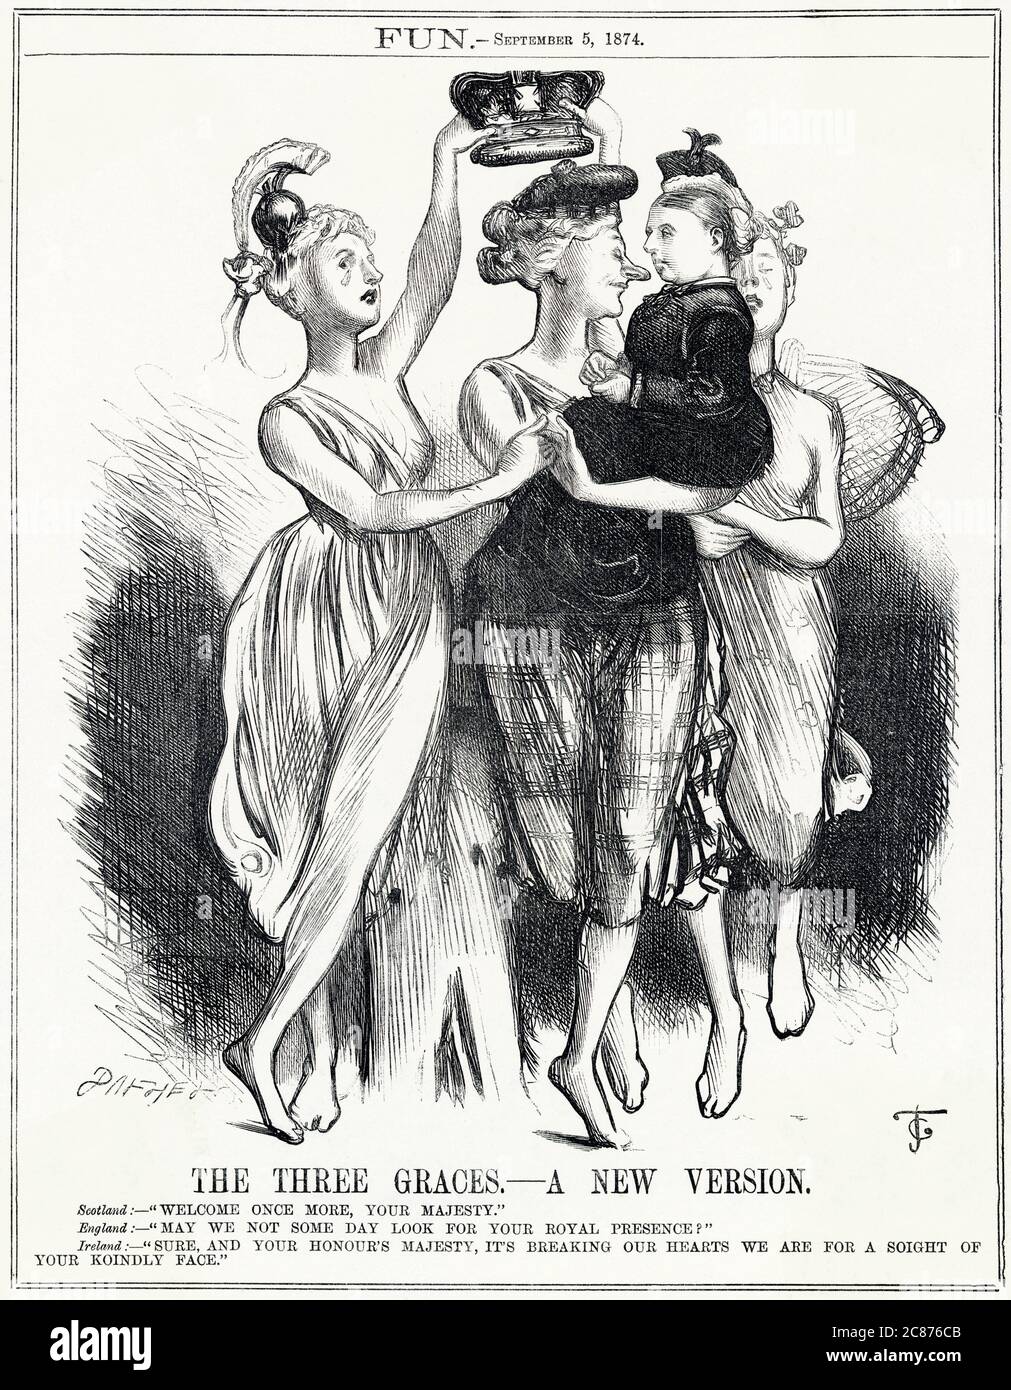 Cartoon, The Three Graces -- A New Version. England, Scotland and Ireland, represented by three female figures posing as the classical Three Graces, hold a diminutive figure of Queen Victoria, and lament that they don't see much of her these days. A comment on Victoria's long absence from public view, following the premature death of Prince Albert in 1861. Stock Photo